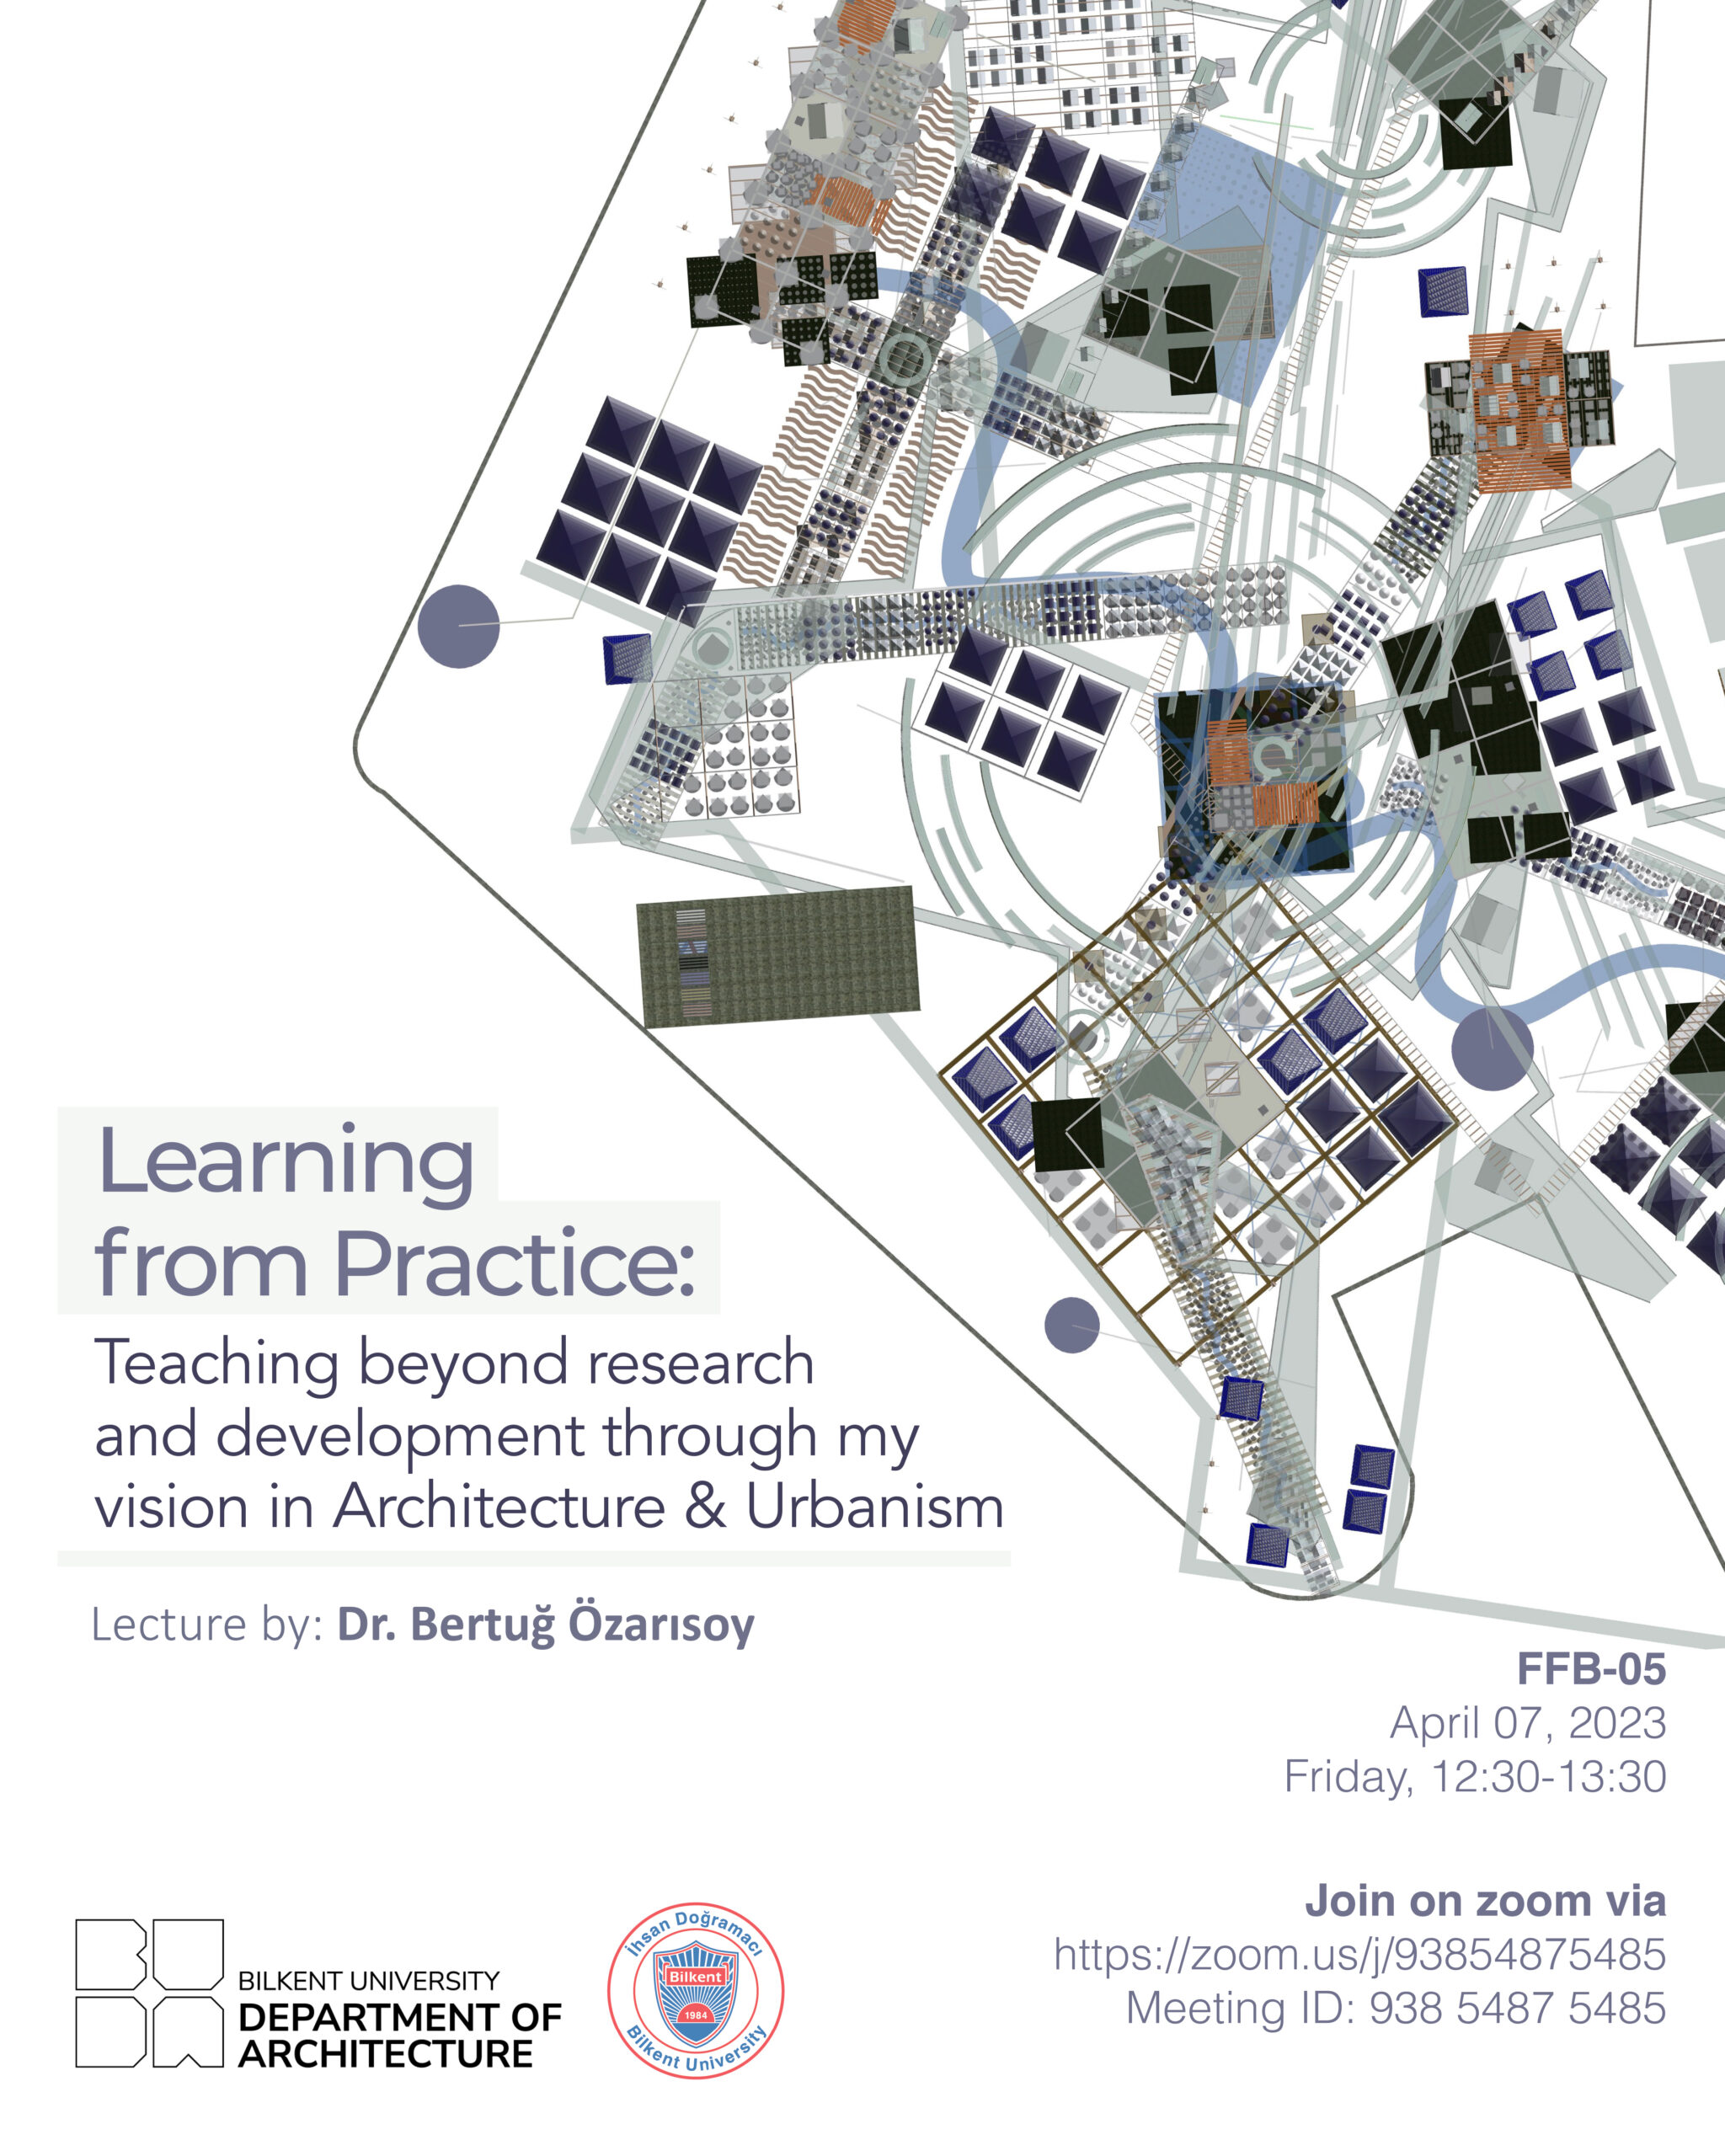 Learning from practice: Teaching beyond research and development through my vision in Architecture & Urbanism